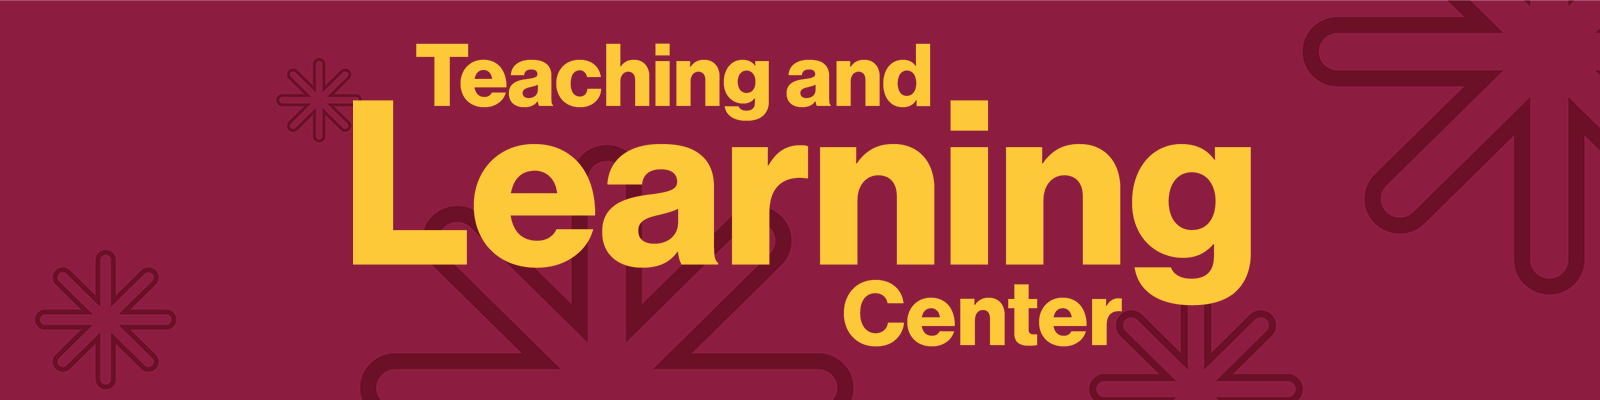 SOLS Teaching and Learning Center Blog